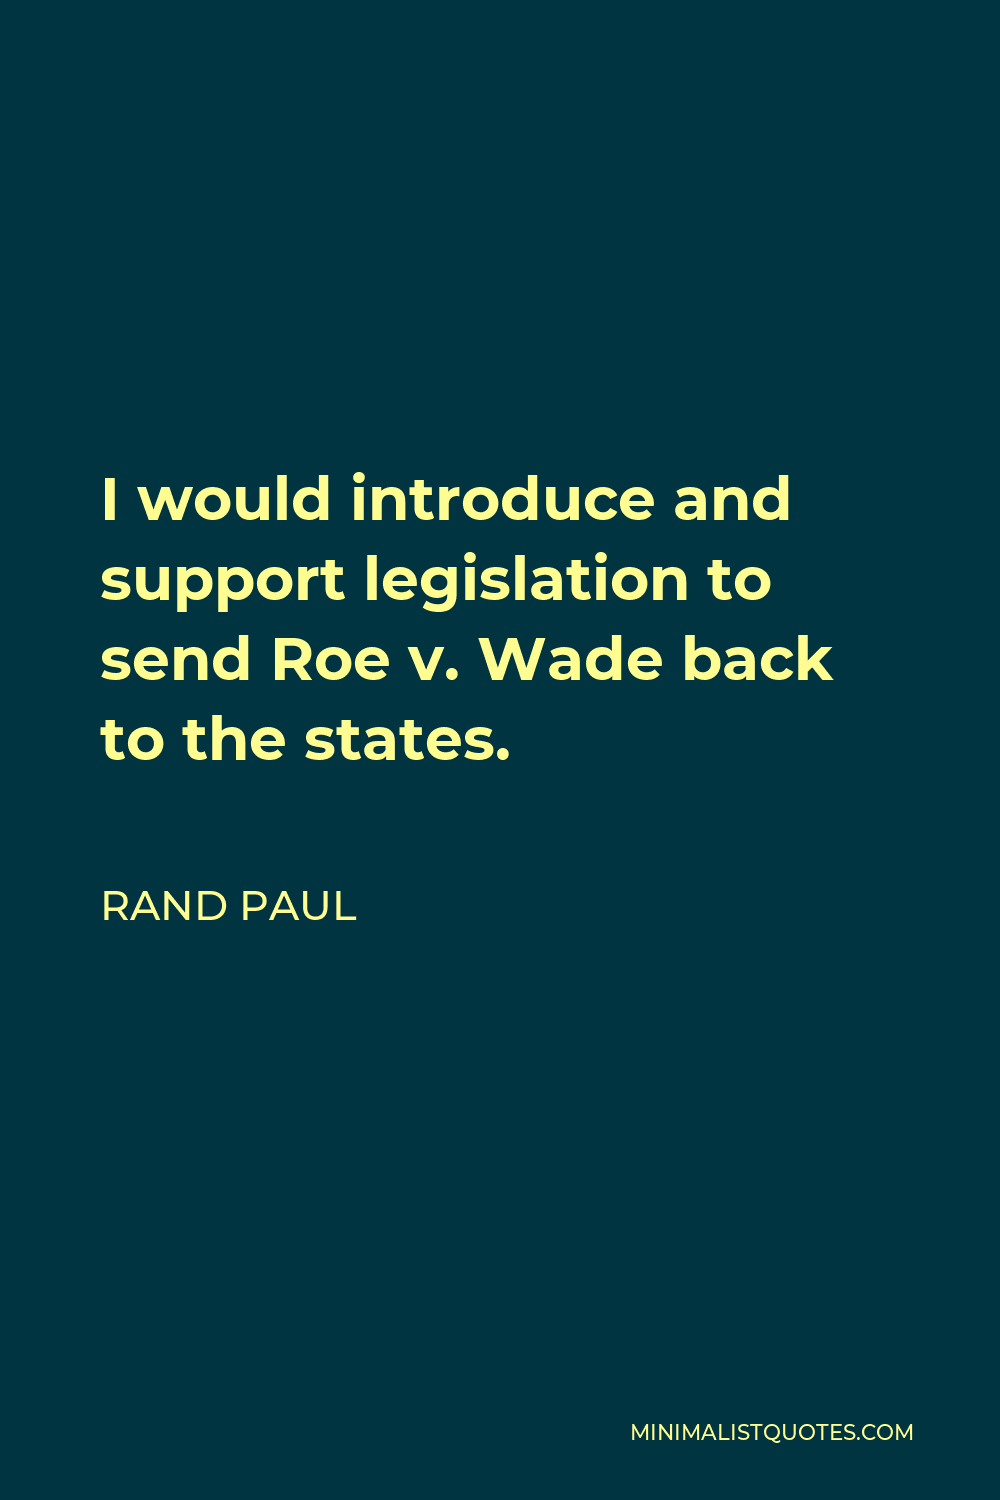 Rand Paul Quote - I would introduce and support legislation to send Roe v. Wade back to the states.